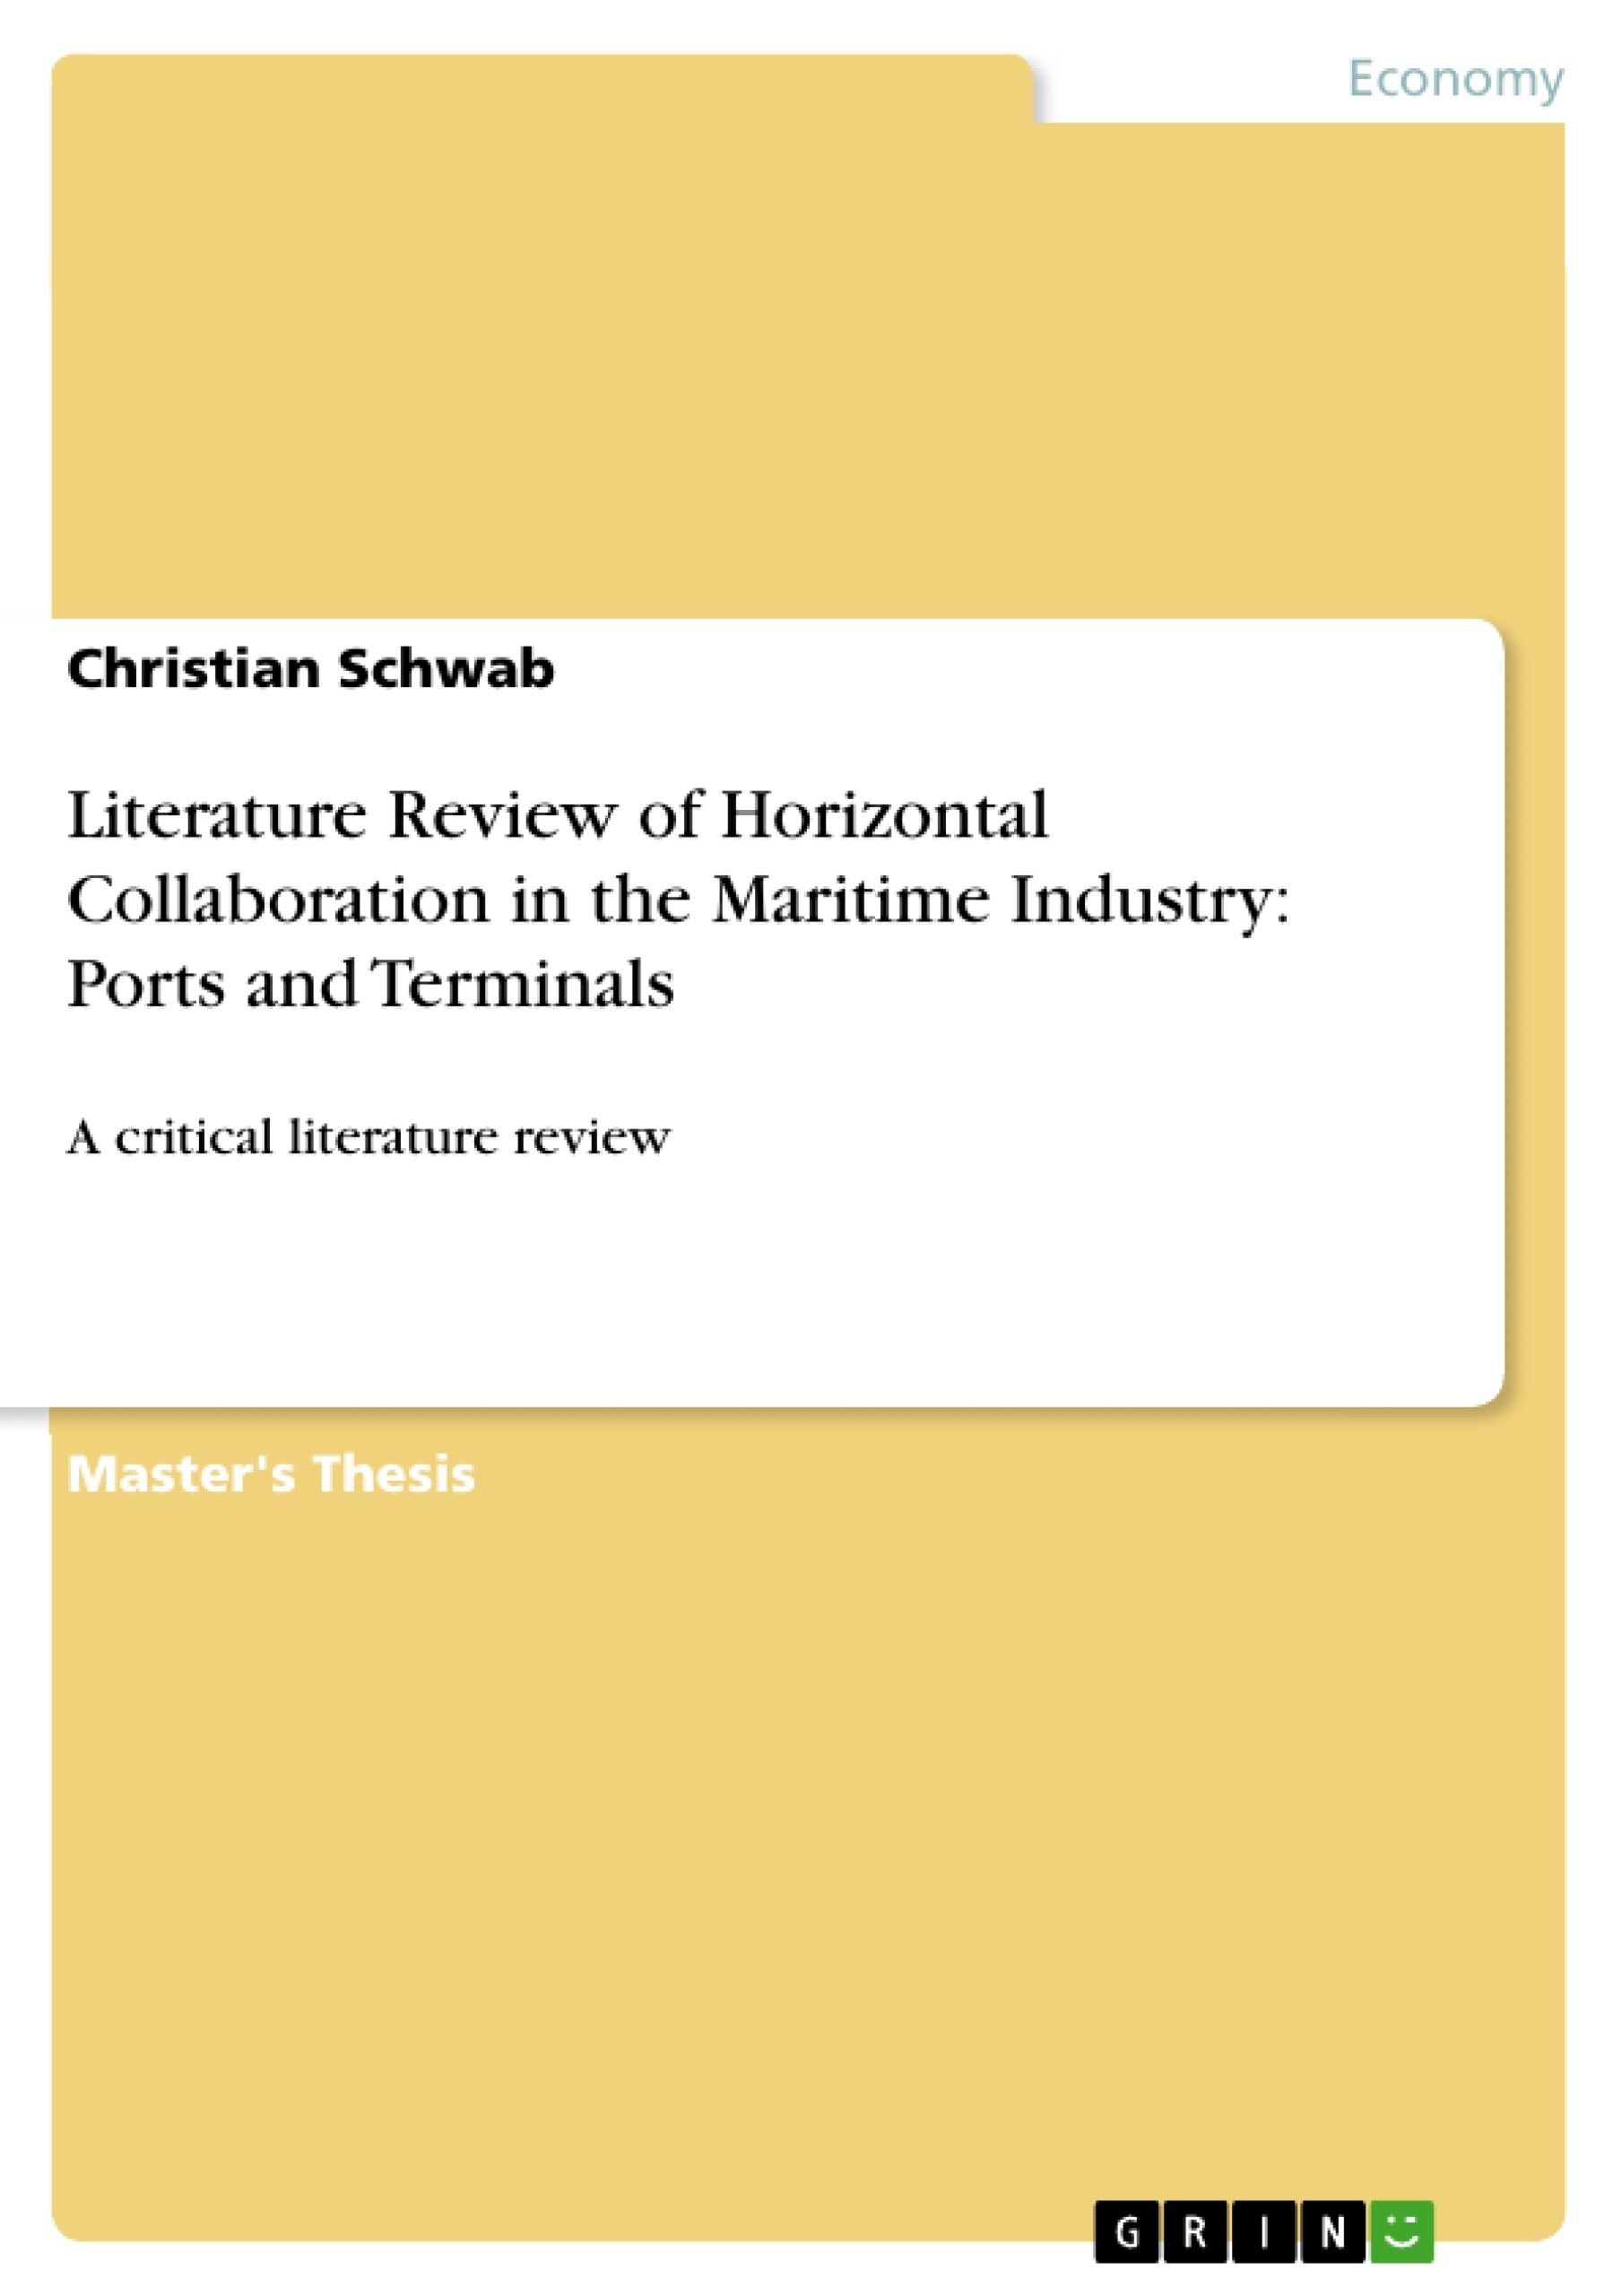 Titel: Literature Review of Horizontal Collaboration in the Maritime Industry: Ports and Terminals